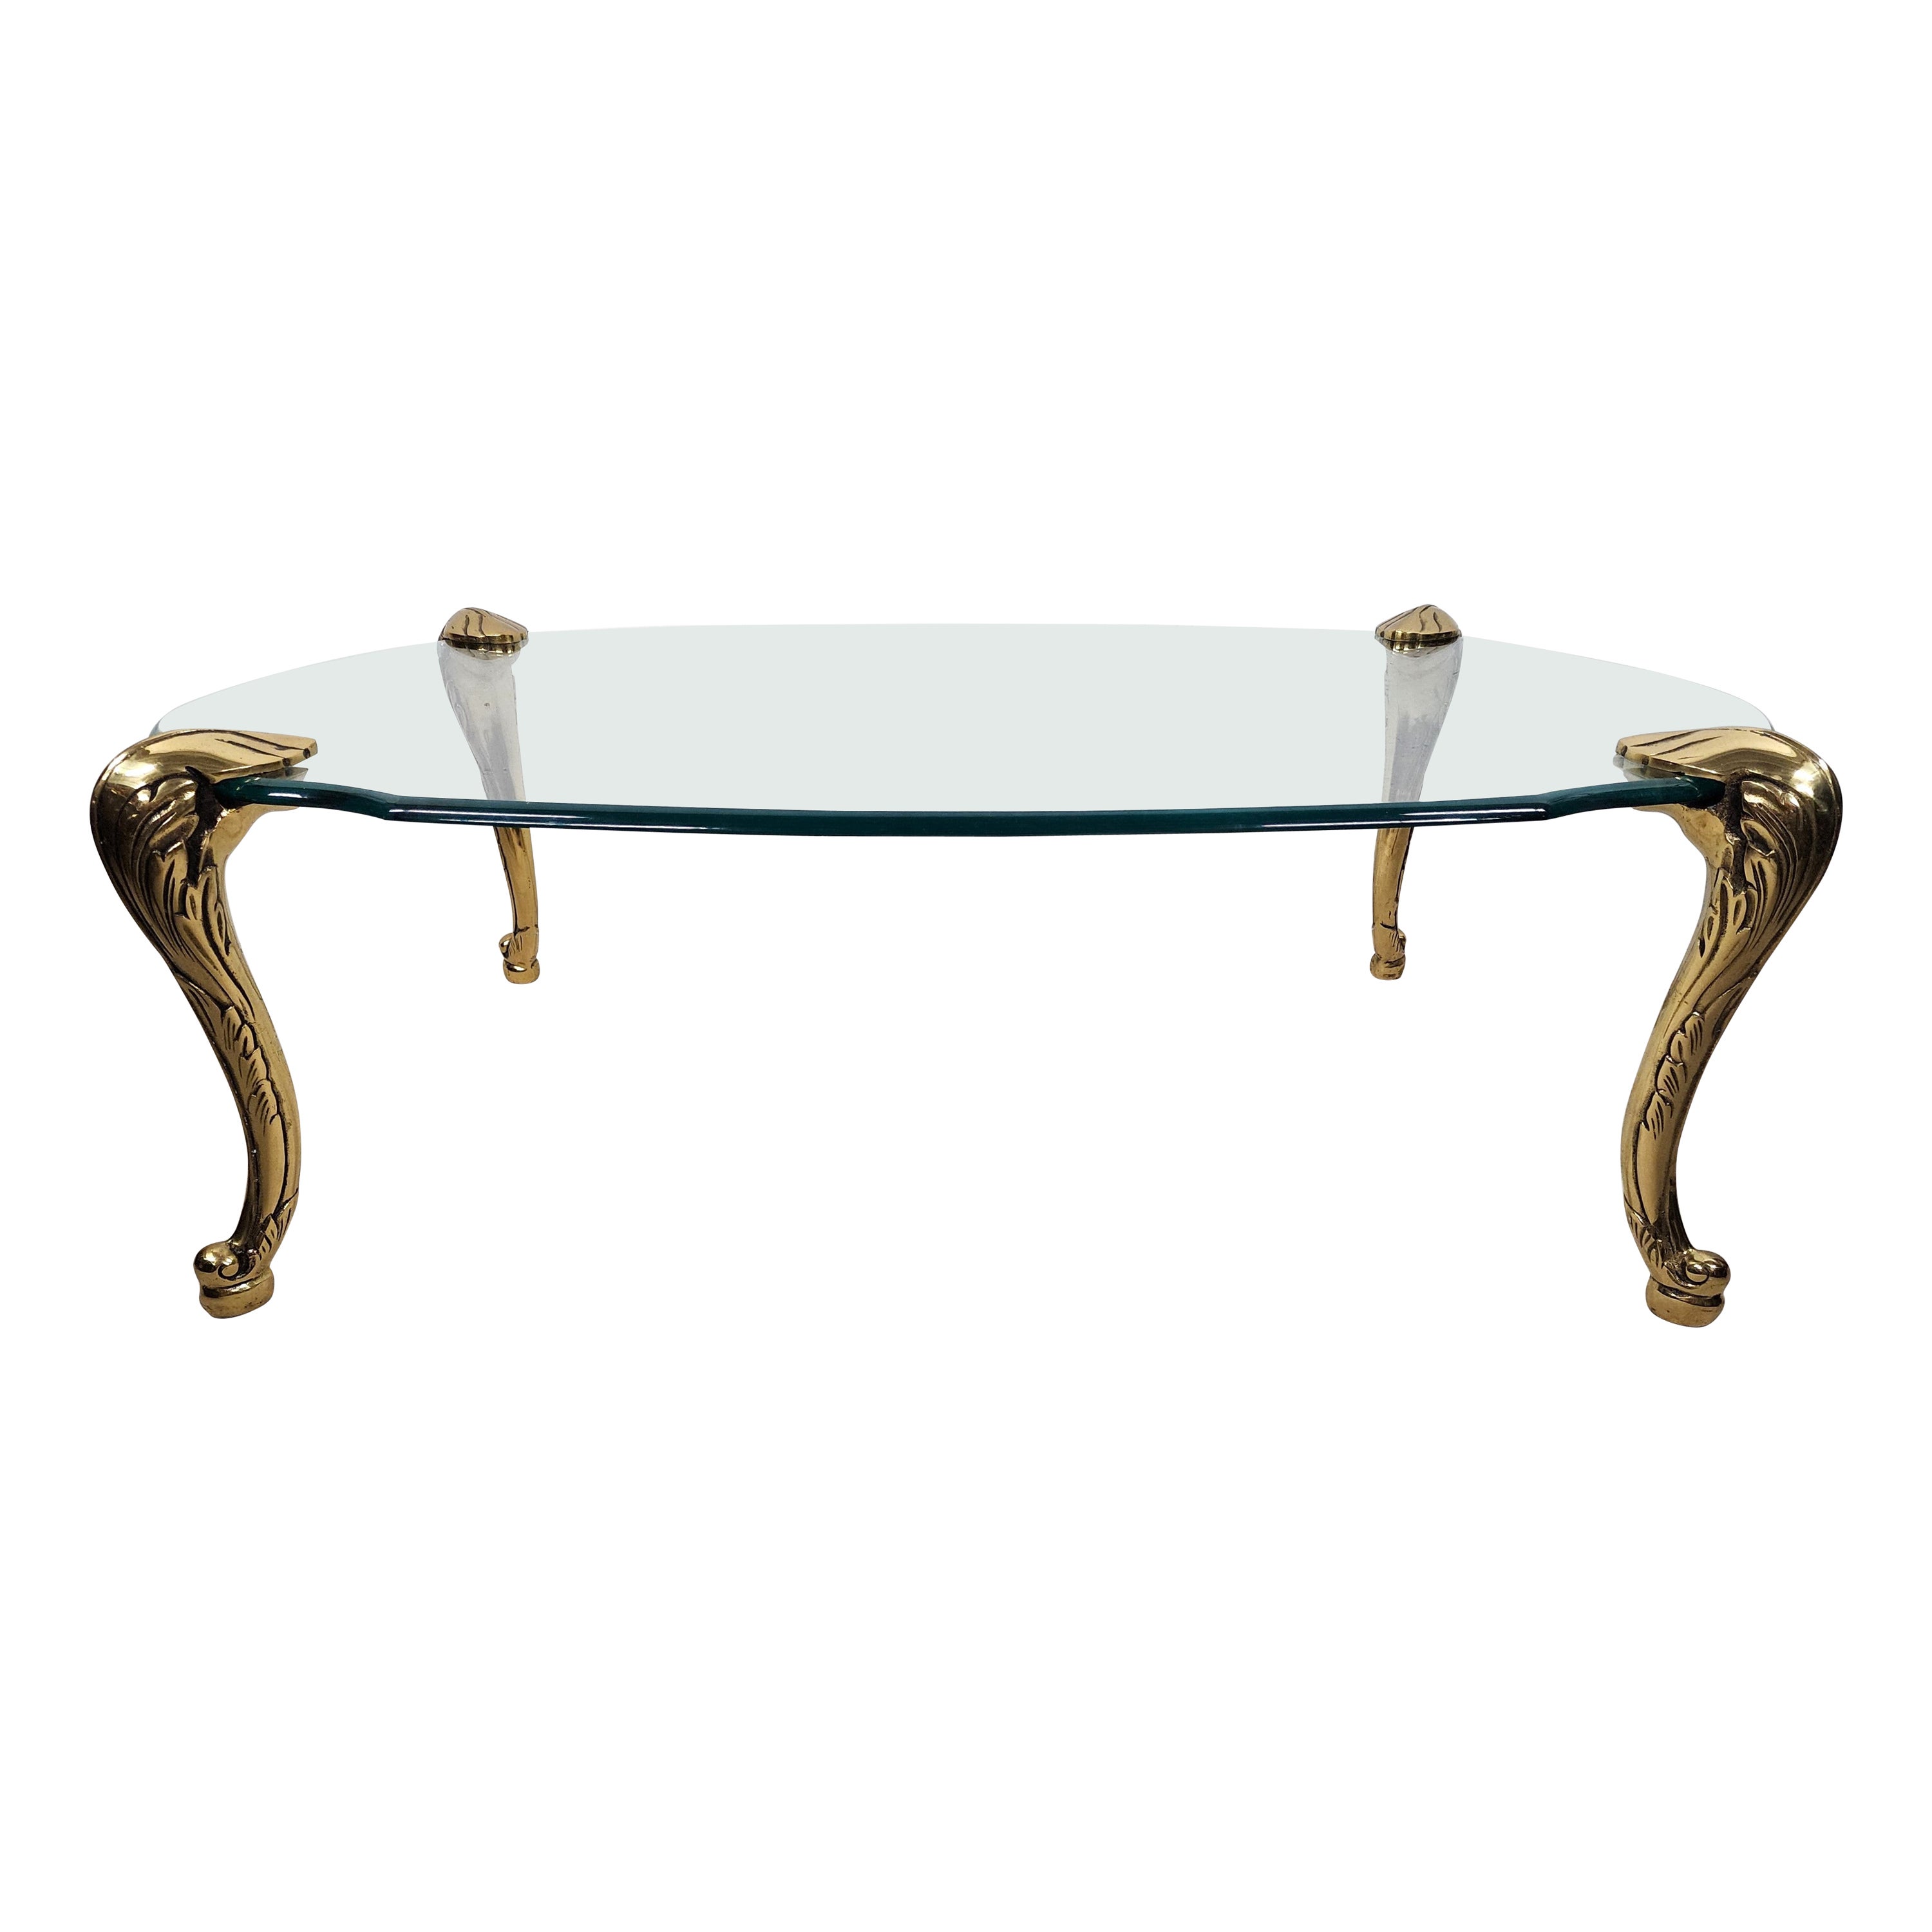 French Provincial Coffee Table Brass & Glass 1970s by Chapman For Sale